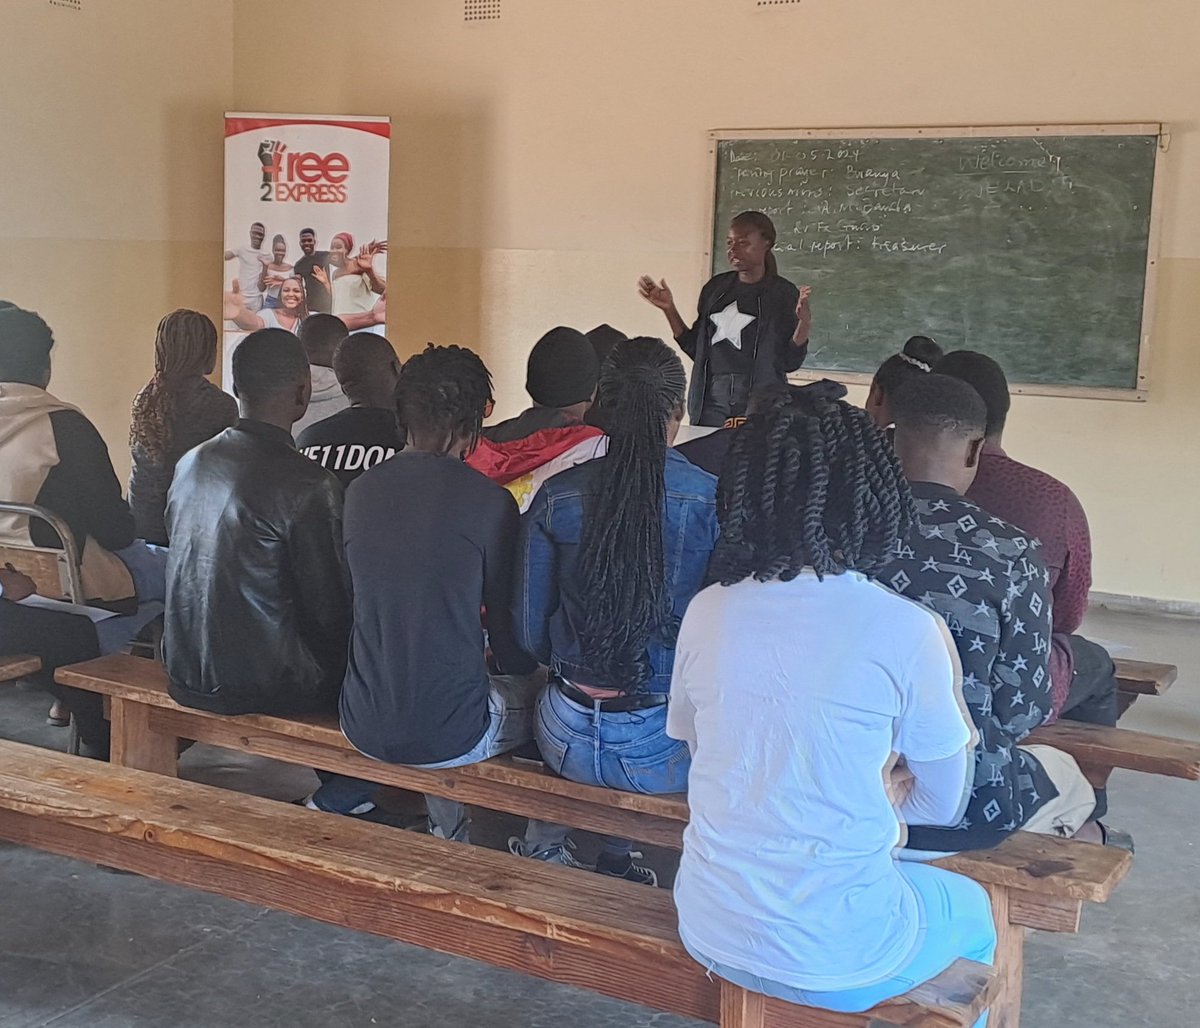 Currently underway: Community discussion in Mashava on sections 61 and 62 of the constitution, educating young people on how to exercise their right to access information and freely express themselves #Free2Express